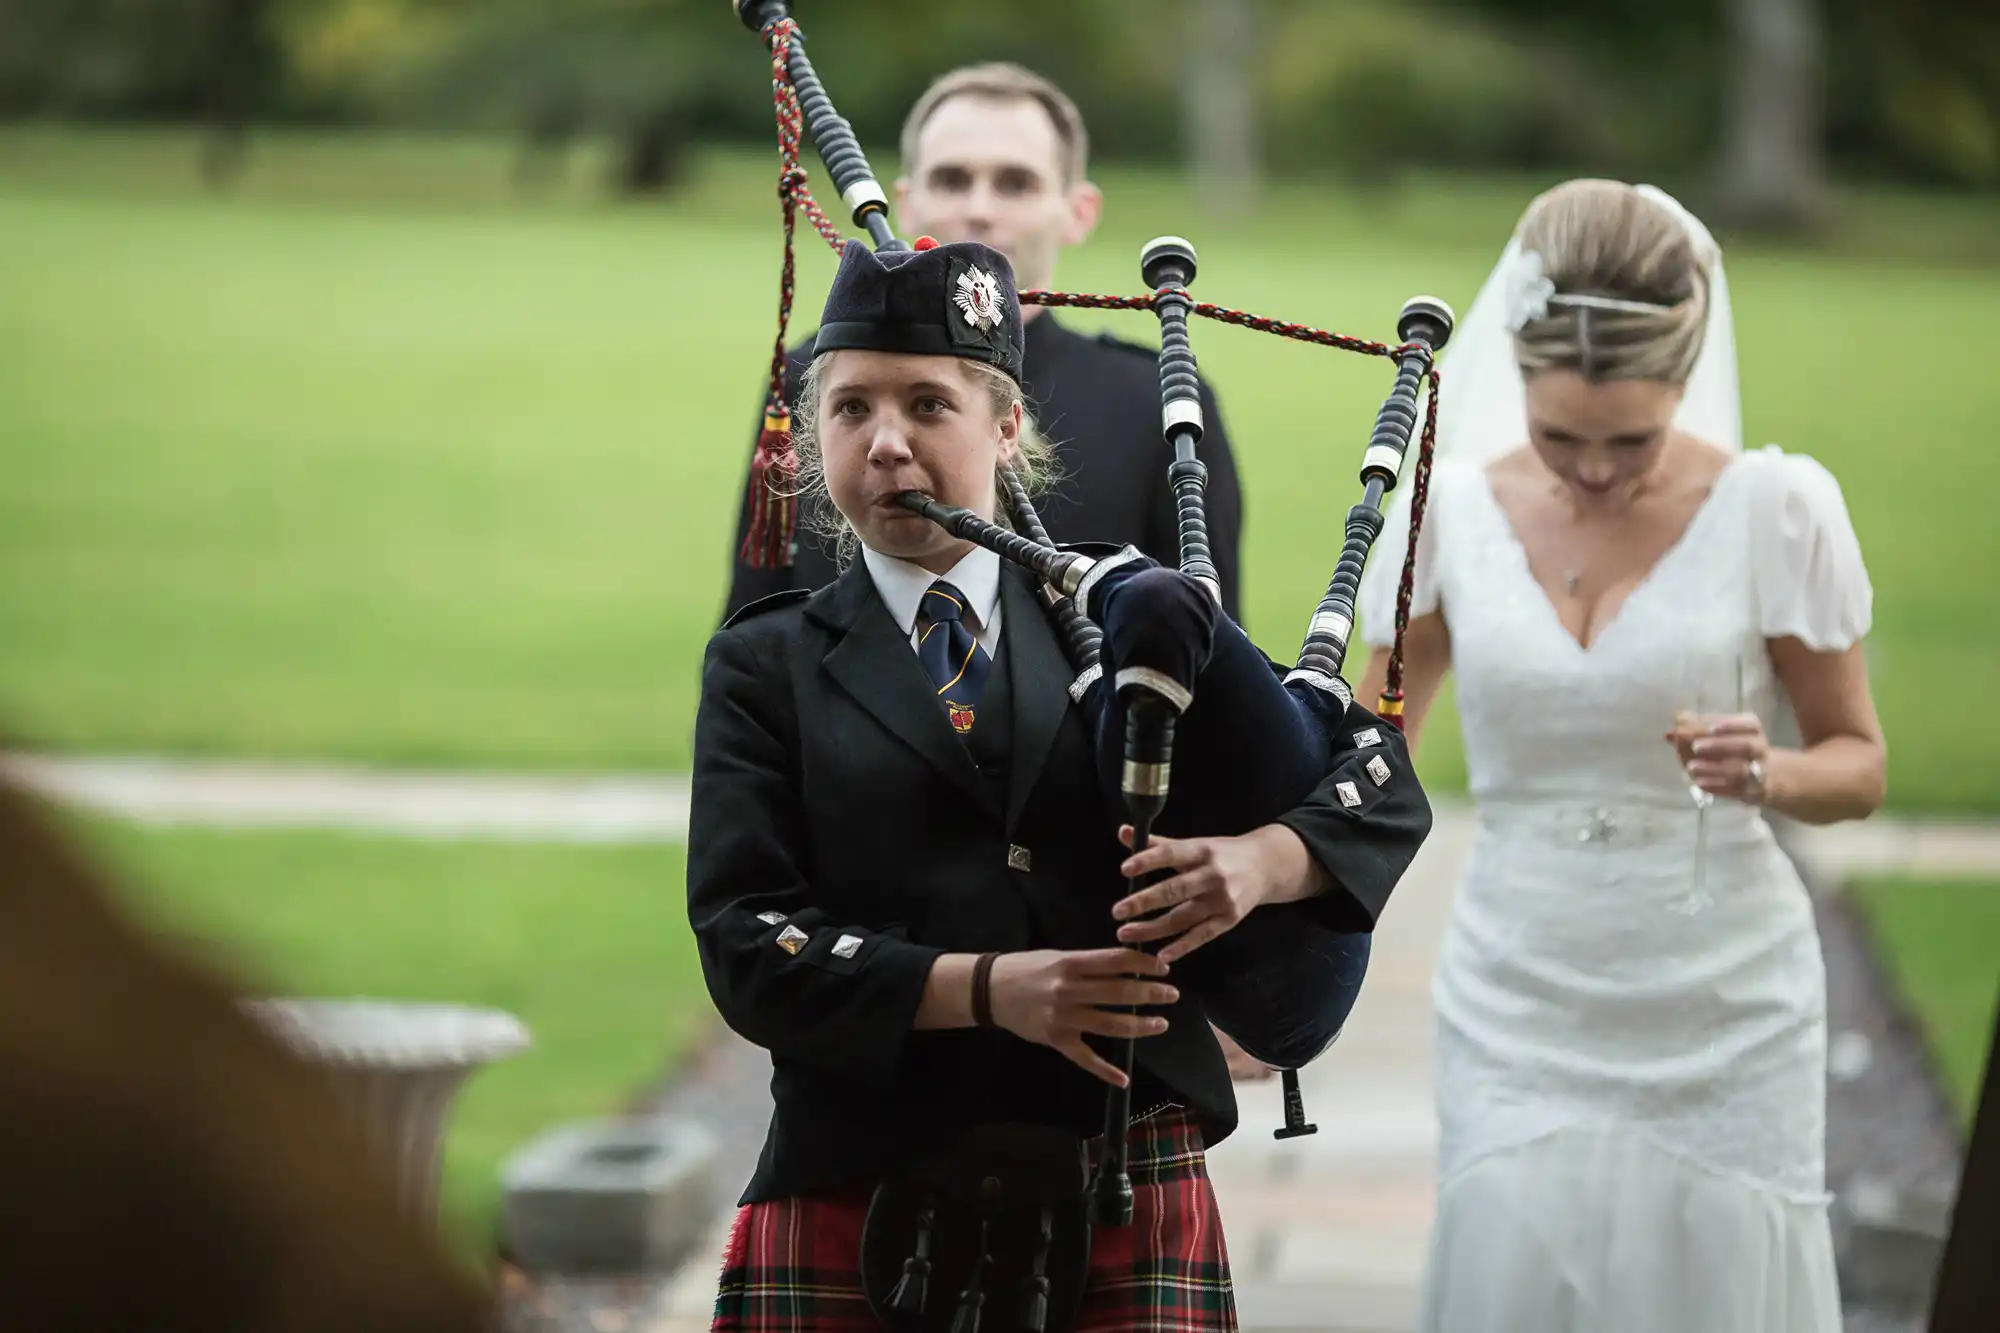 A young bagpiper in traditional scottish attire plays at a wedding, with a bride walking in the background.